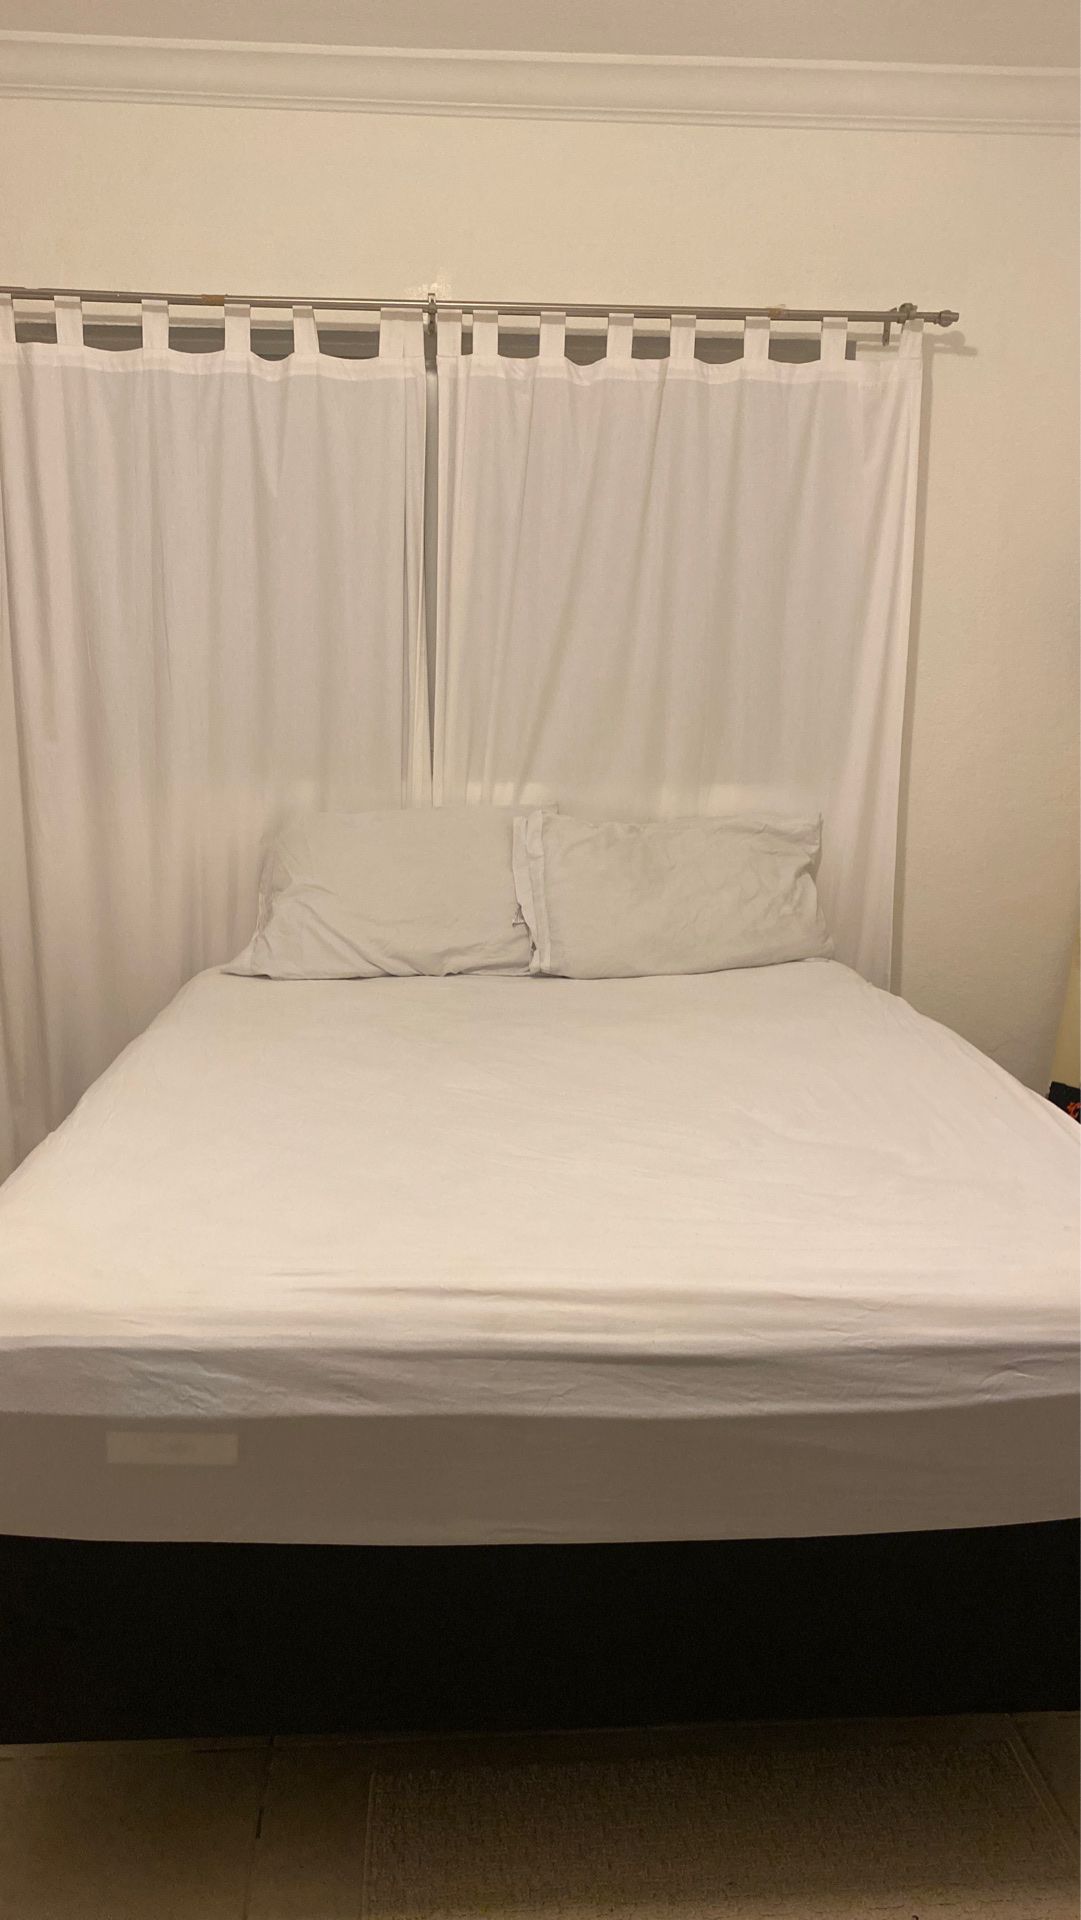 2019 (Queen, includes bed frame)